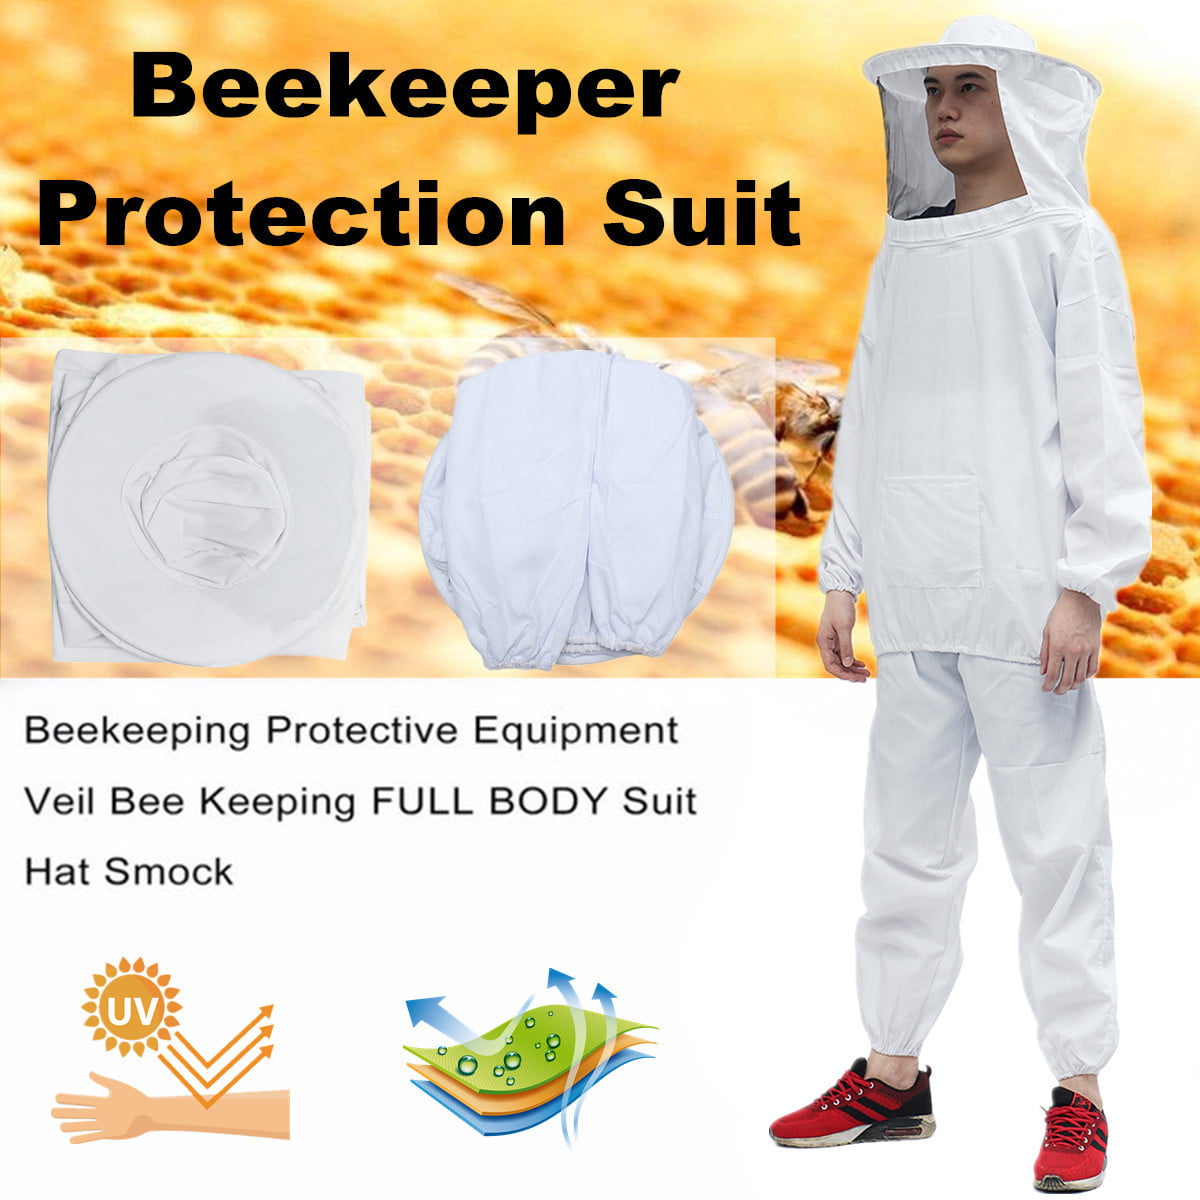 Beekeeper Protection Bee keeping Suit Safe Veil Hat All Body Equipment Hood